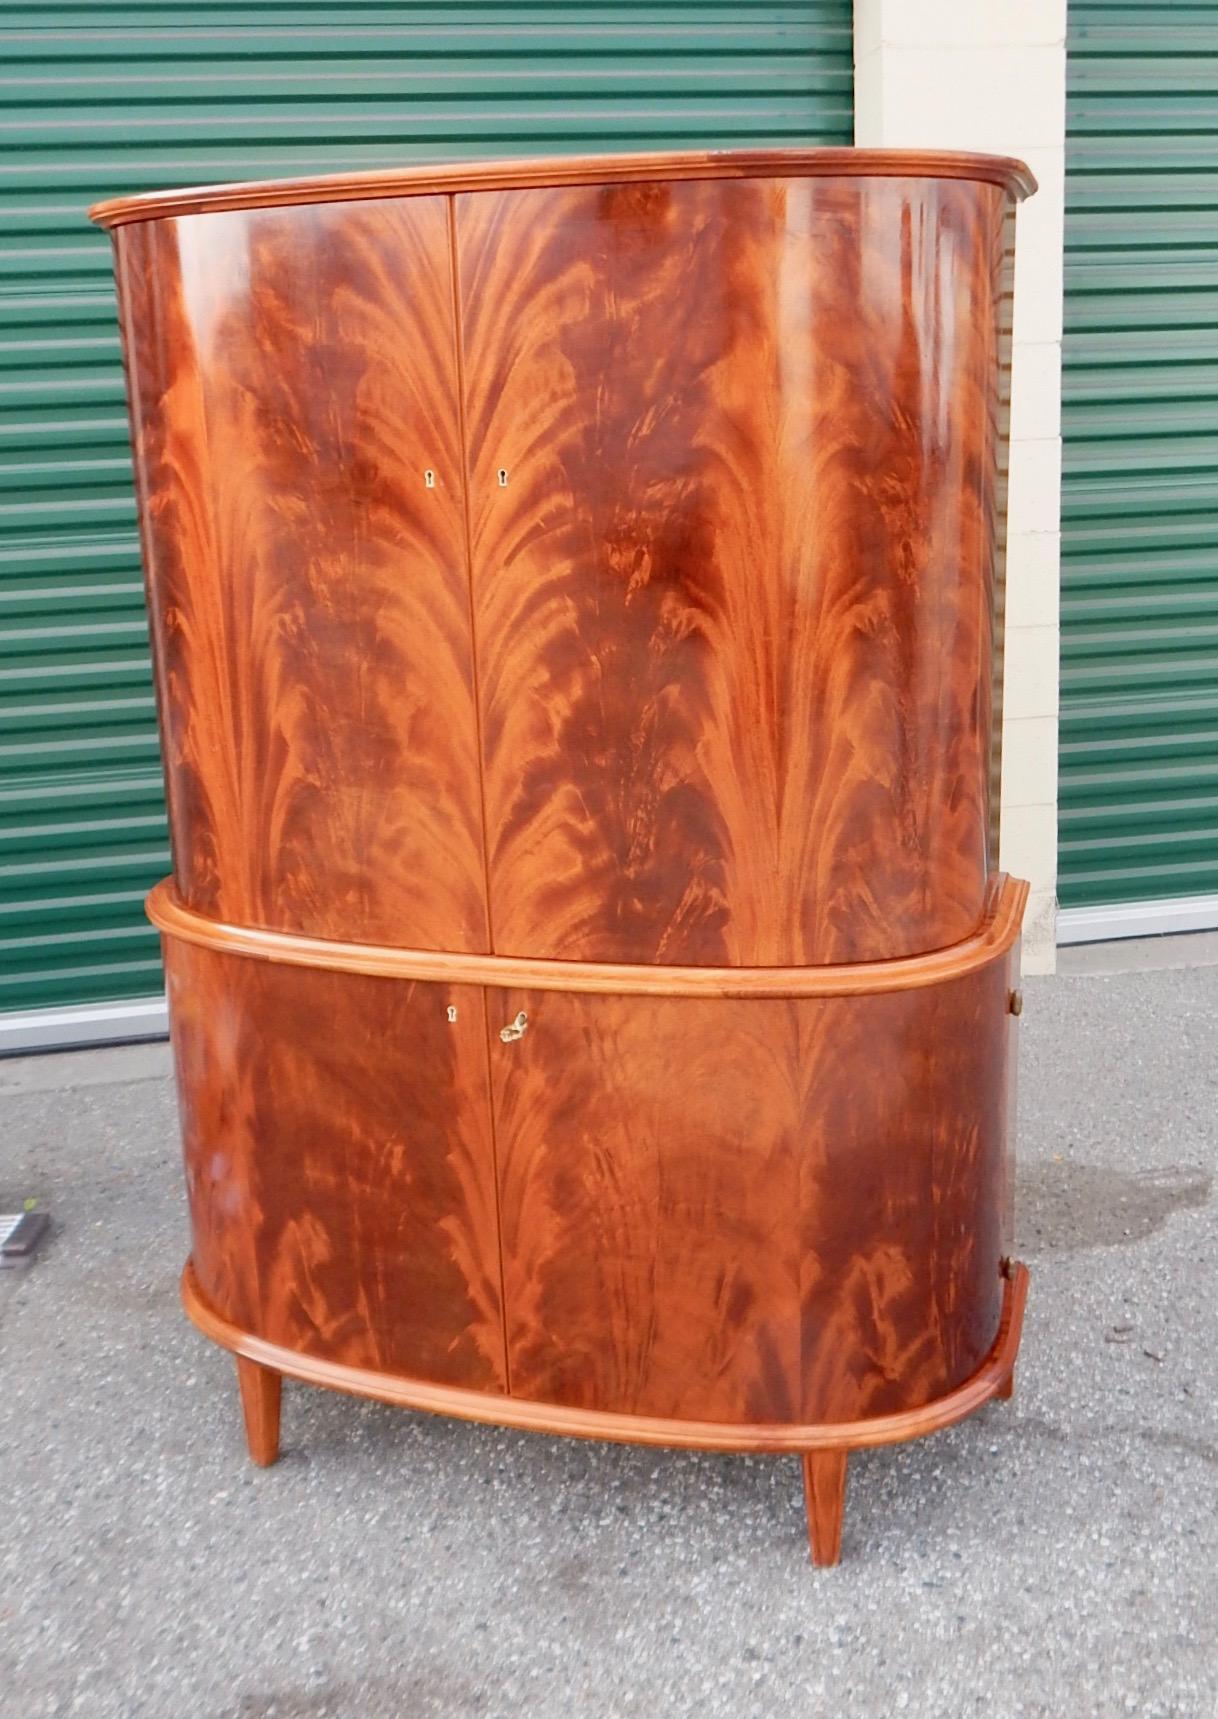 Storage cabinet or sideboard rendered in highly figured bookmatched flame mahogany. Designed for and sold at Nordiskakompaniet department store in Stockholm, Sweden in the late 1940s. With four doors to provide lots of storage capacity. With all